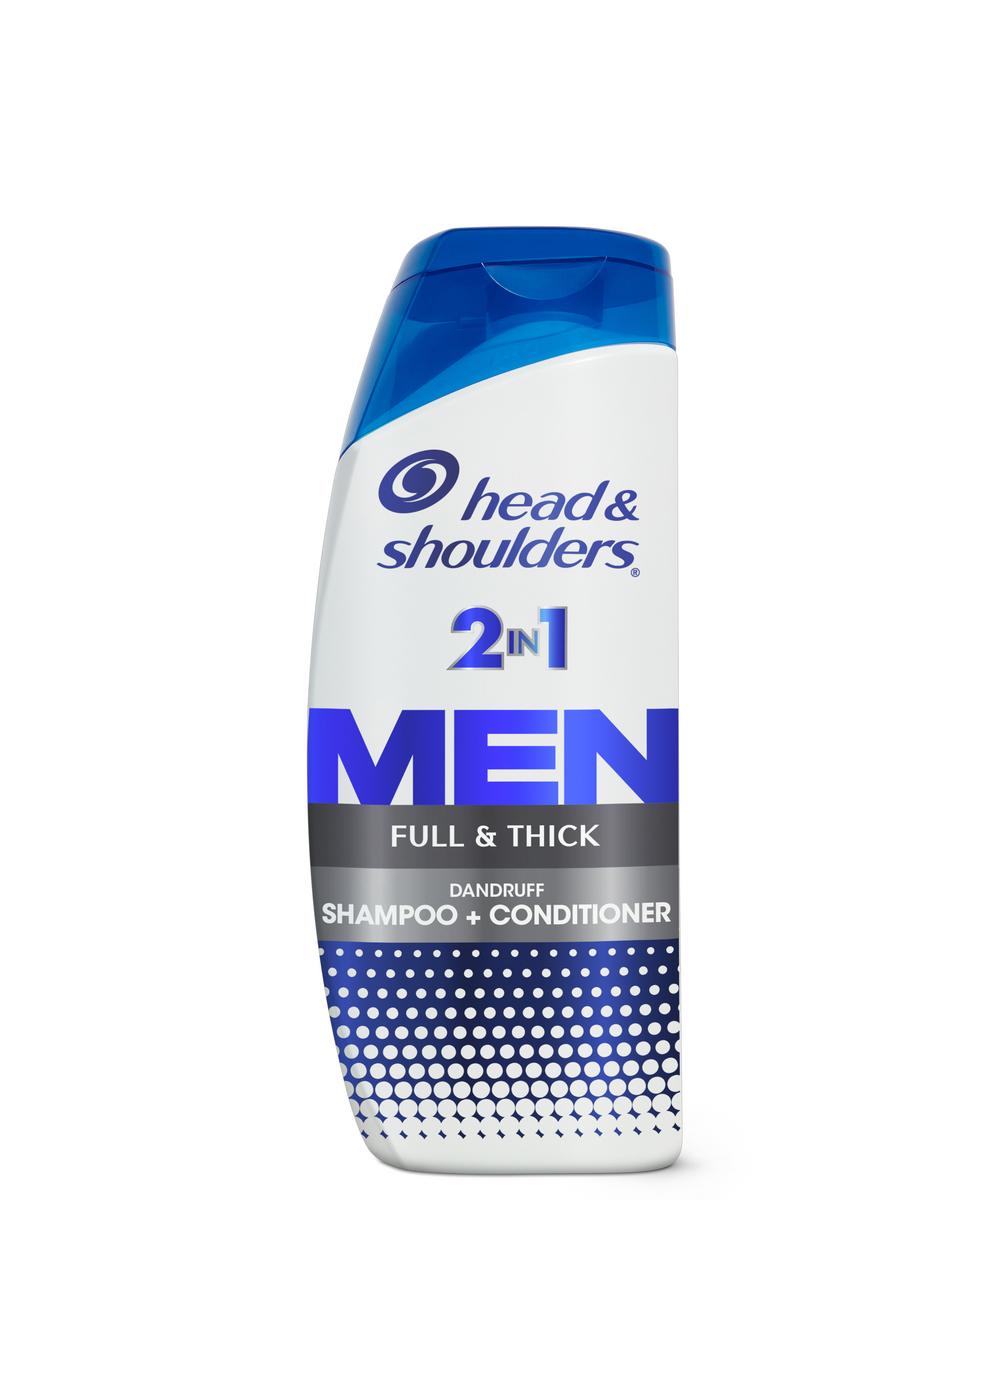 Head & Shoulders 2 in 1 Men Dandruff Shampoo and Conditioner - Full & Thick; image 4 of 11